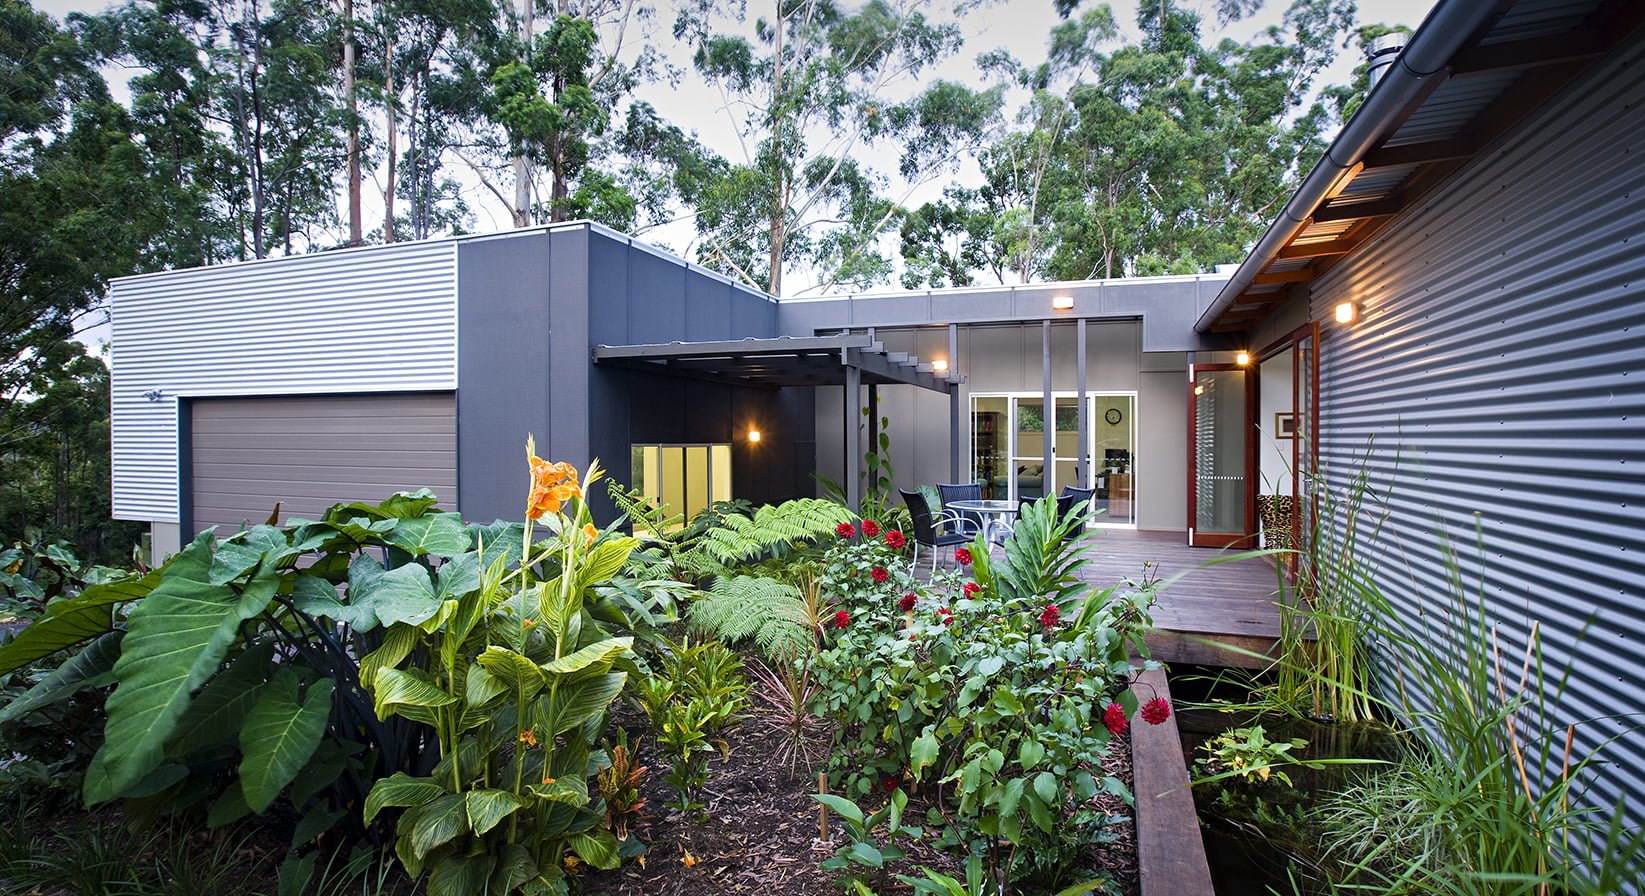 Storrs Road by Tim Stewart Architects